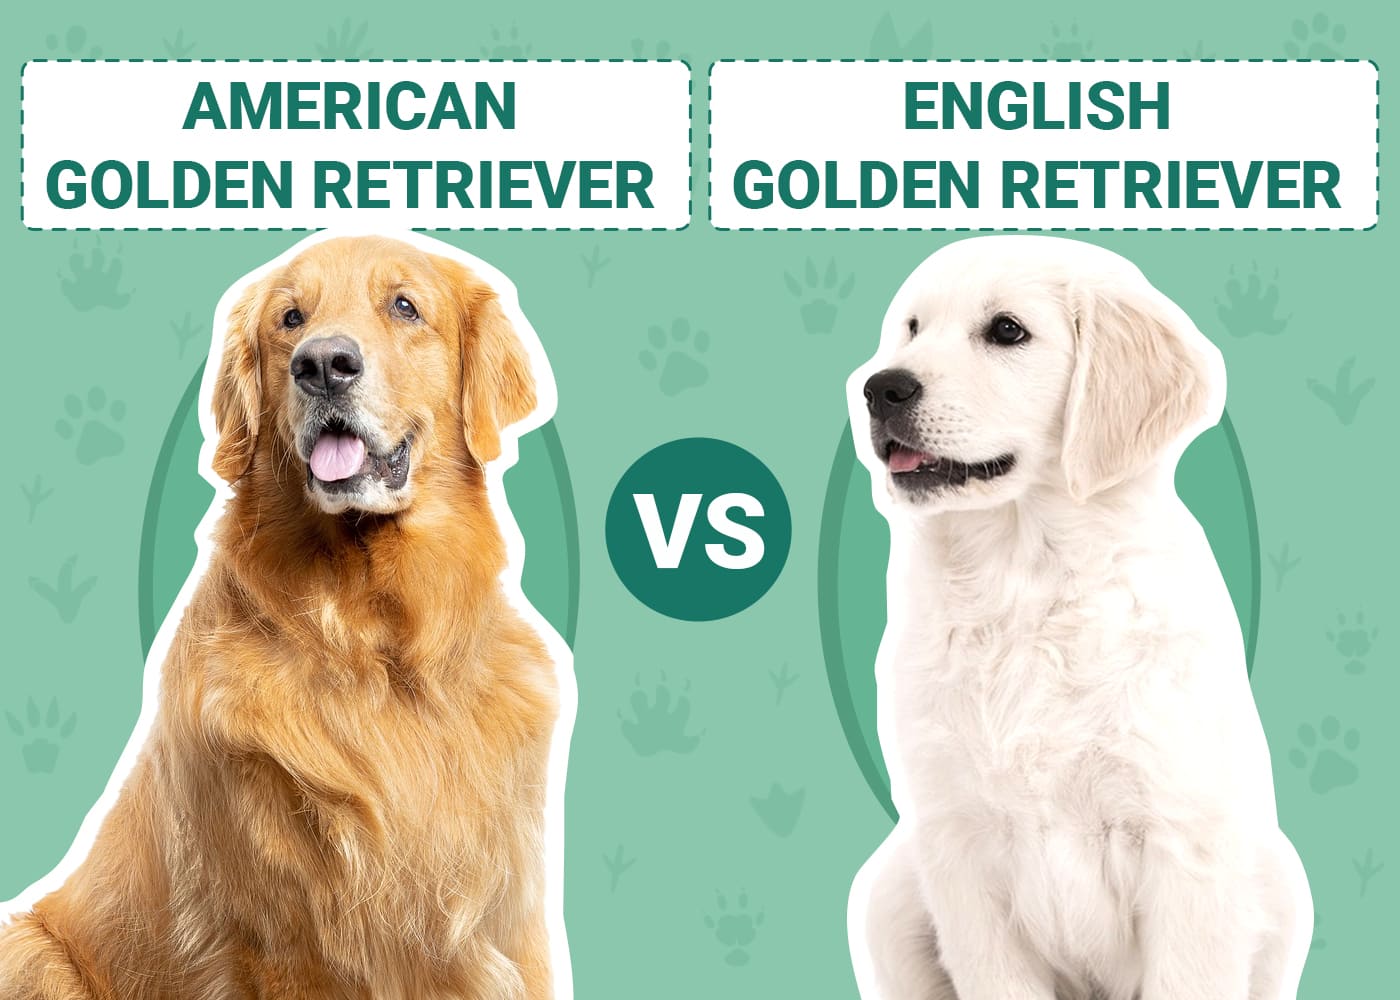 Differences between the American Golden & English Golden